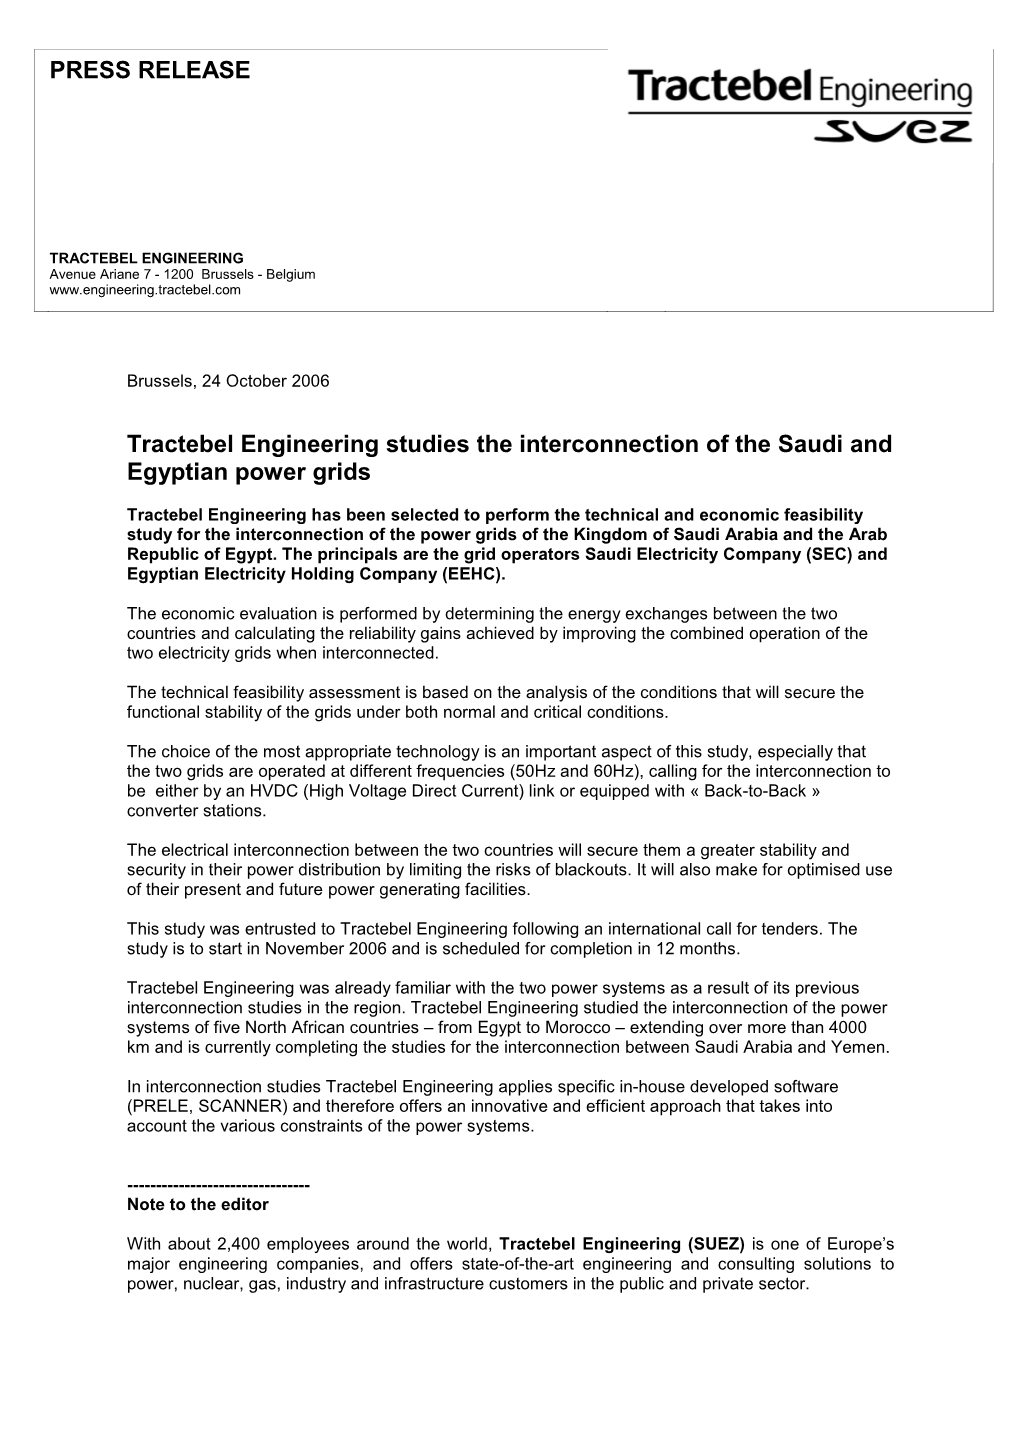 PRESS RELEASE Tractebel Engineering Studies the Interconnection of the Saudi and Egyptian Power Grids